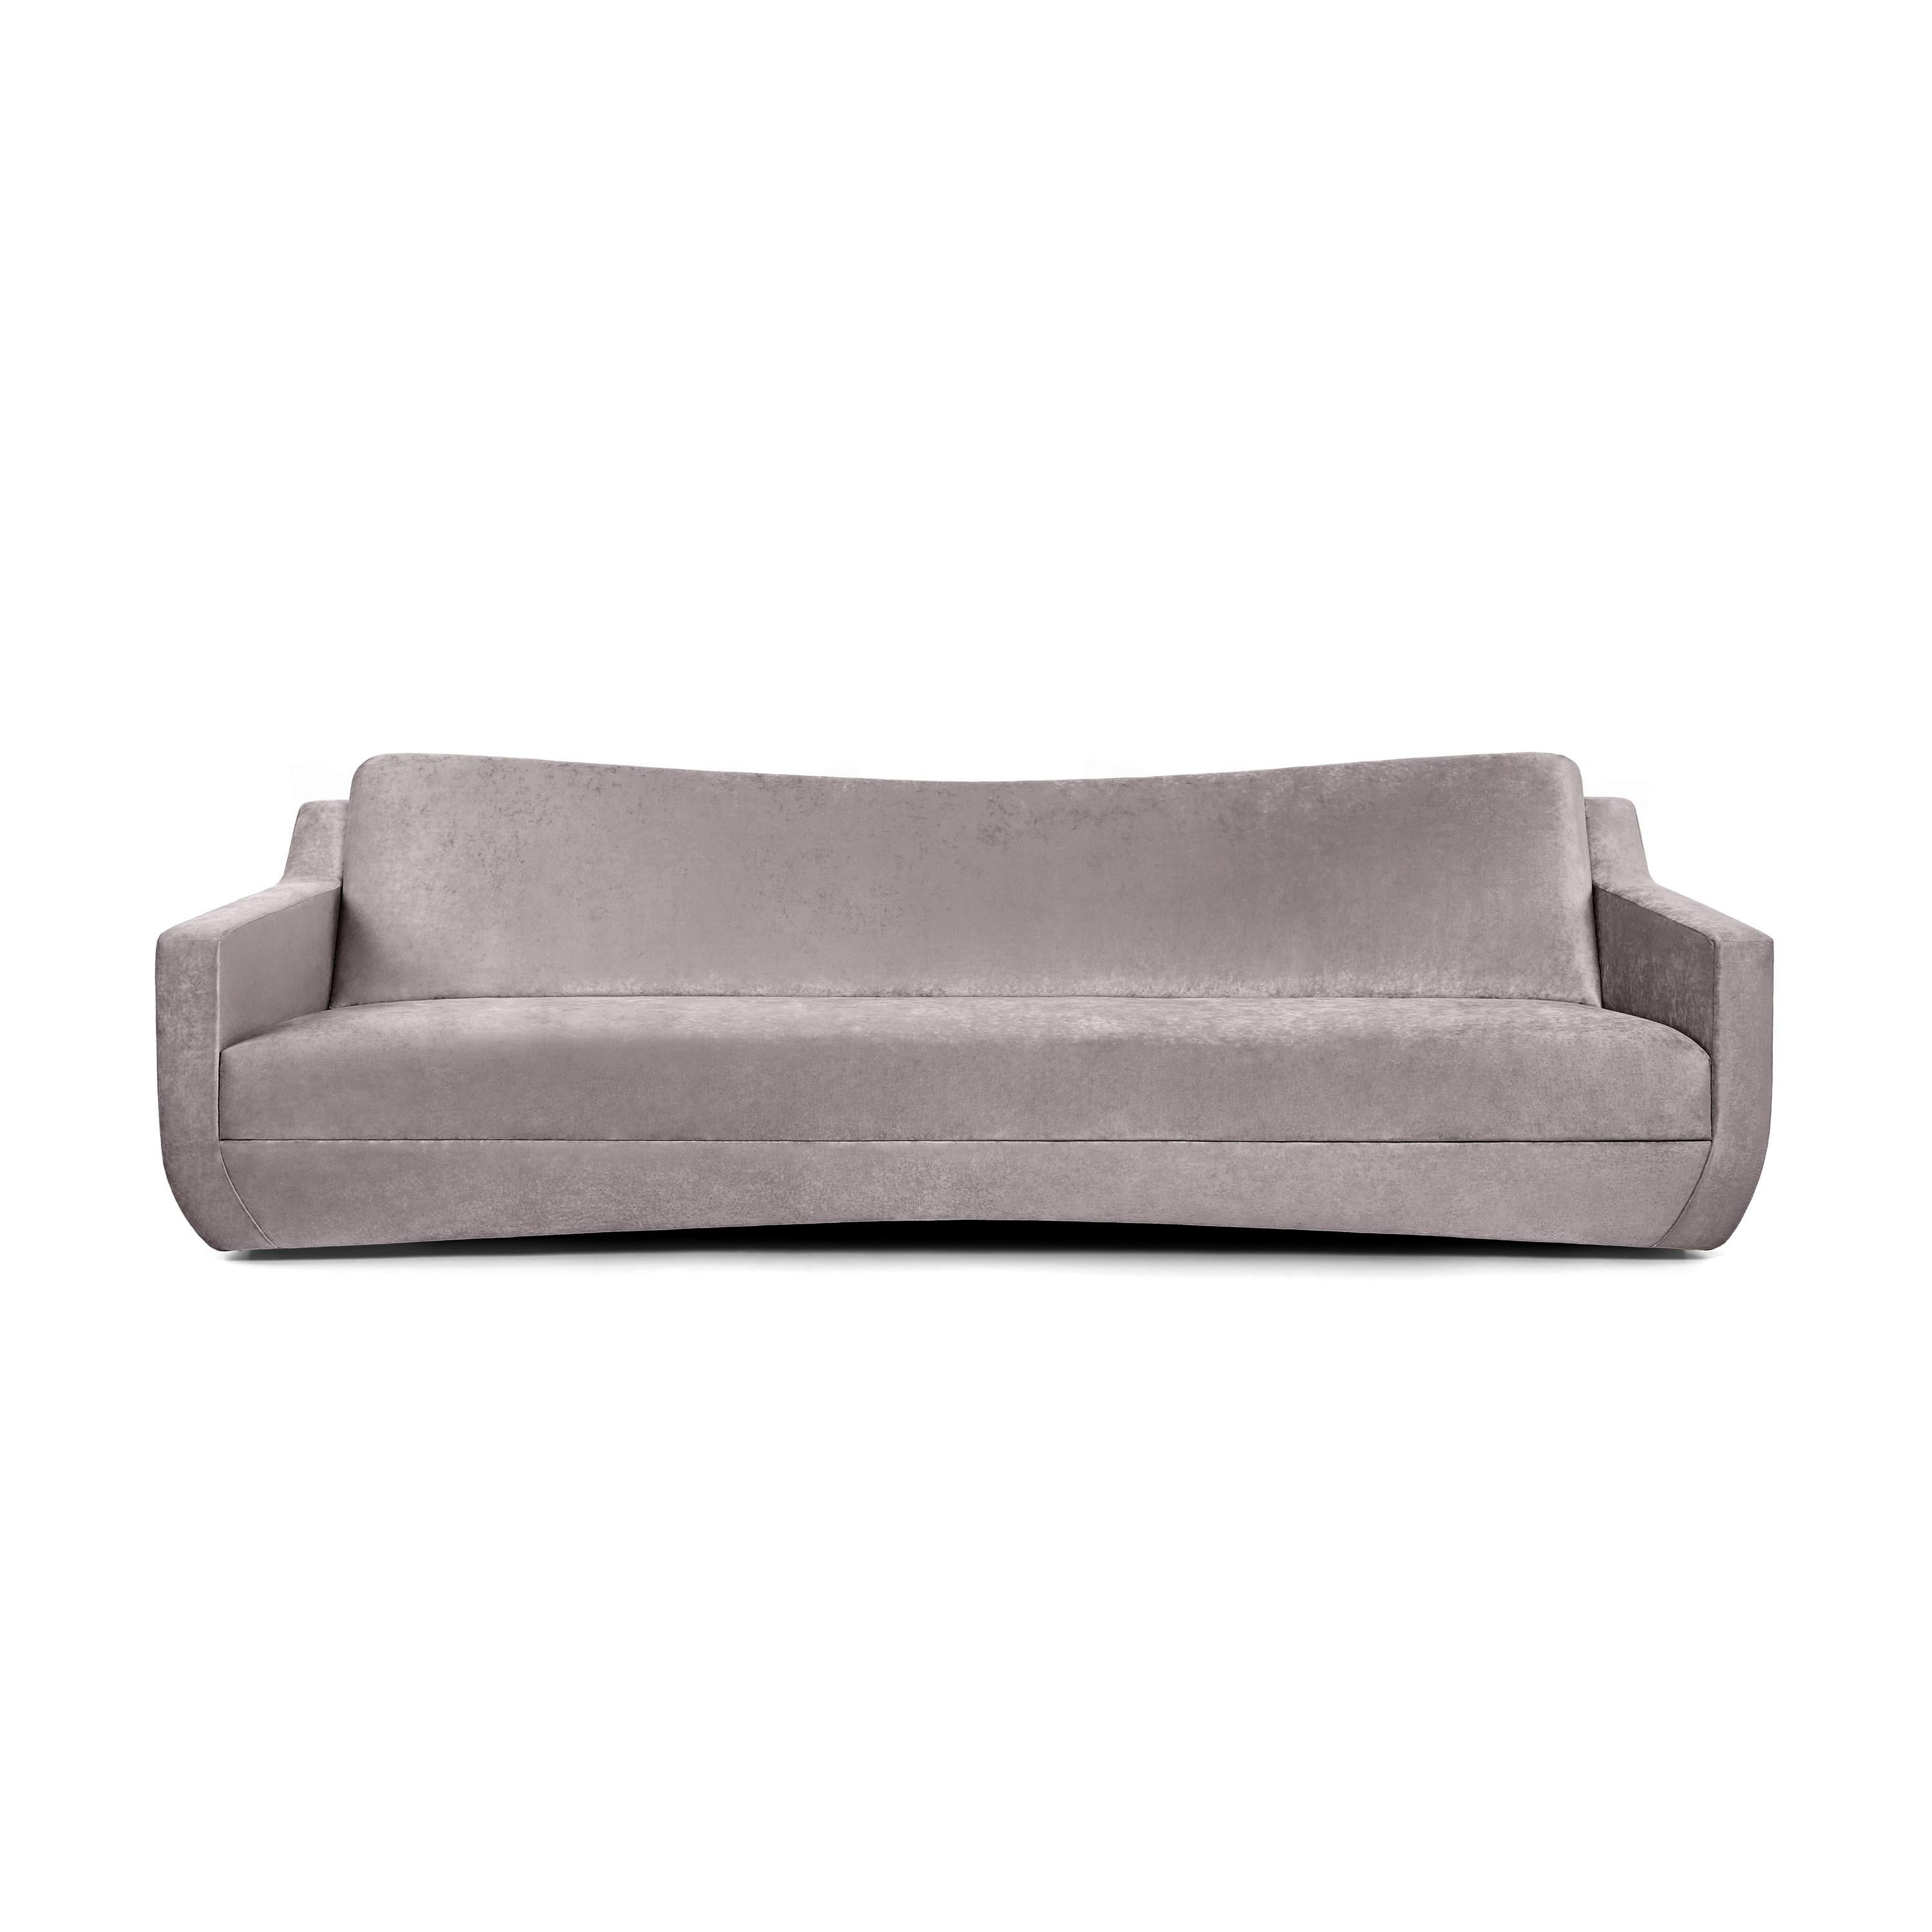 This sofa makes a bold statement with its clean and captivating design, delivering an effortlessly cool finish.
The poised back enhances its built-in seat cushion, complemented by discreet seaming to complete its faultless look.
Upholstery: